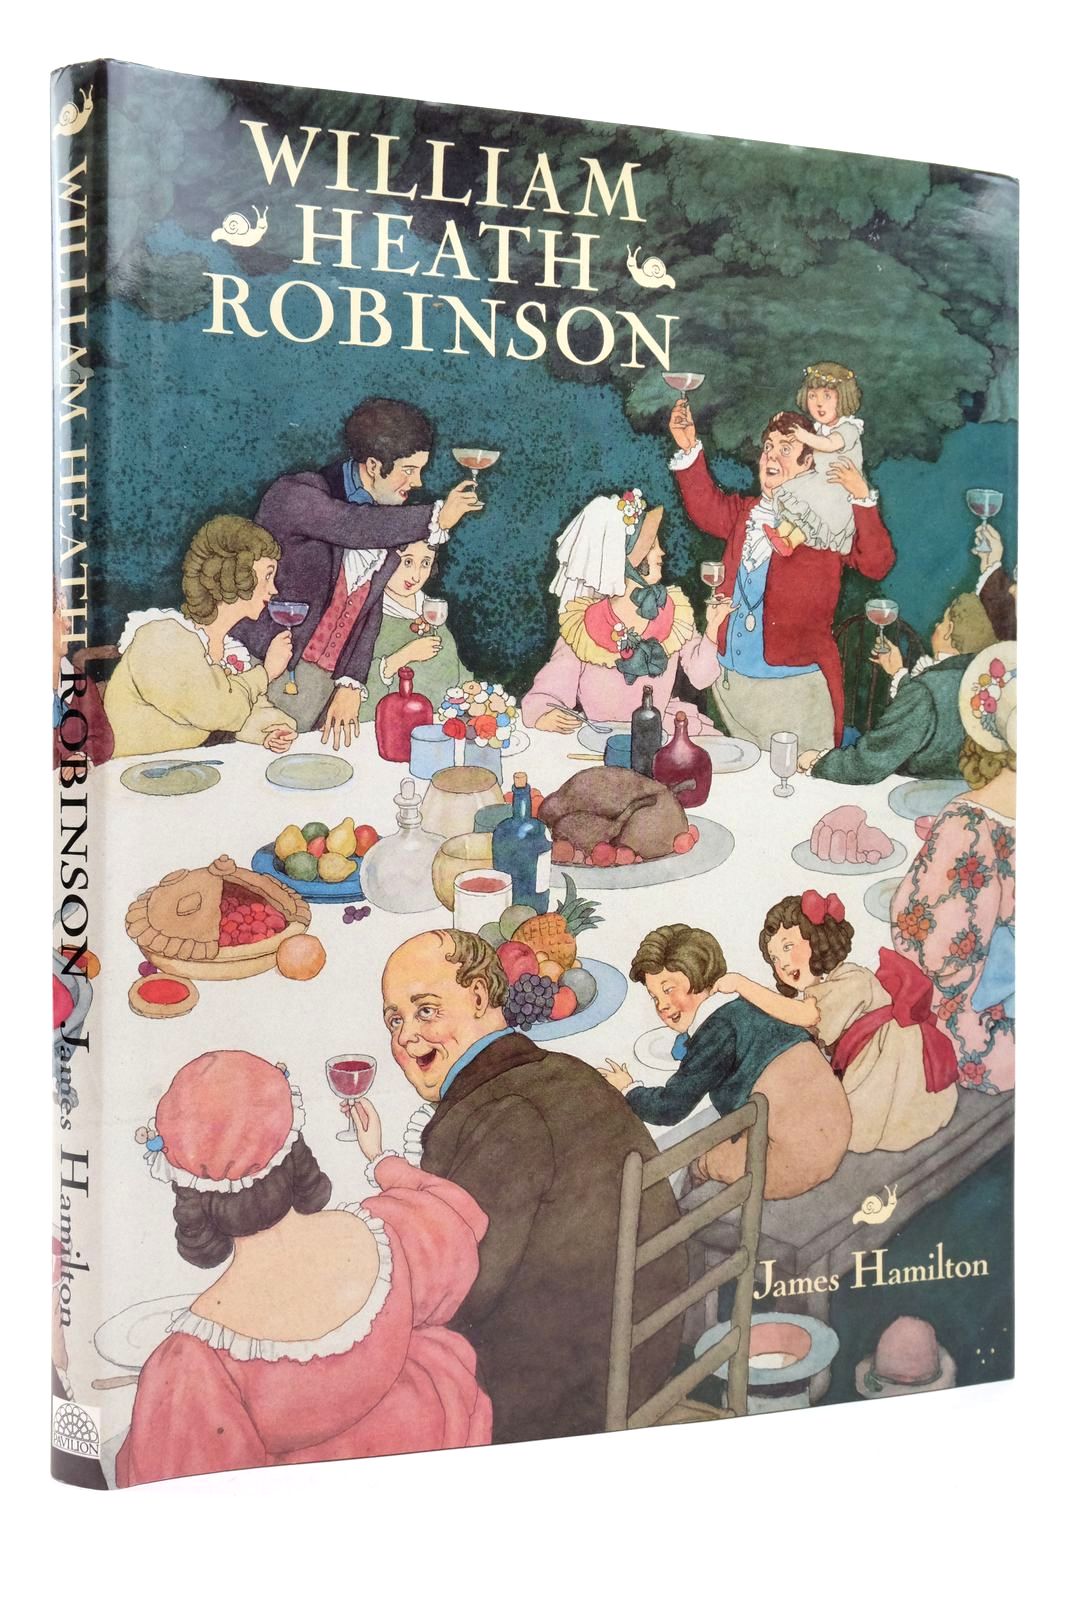 Photo of WILLIAM HEATH ROBINSON written by Robinson, W. Heath Hamilton, James illustrated by Robinson, W. Heath published by Pavilion Books Ltd. (STOCK CODE: 2138618)  for sale by Stella & Rose's Books